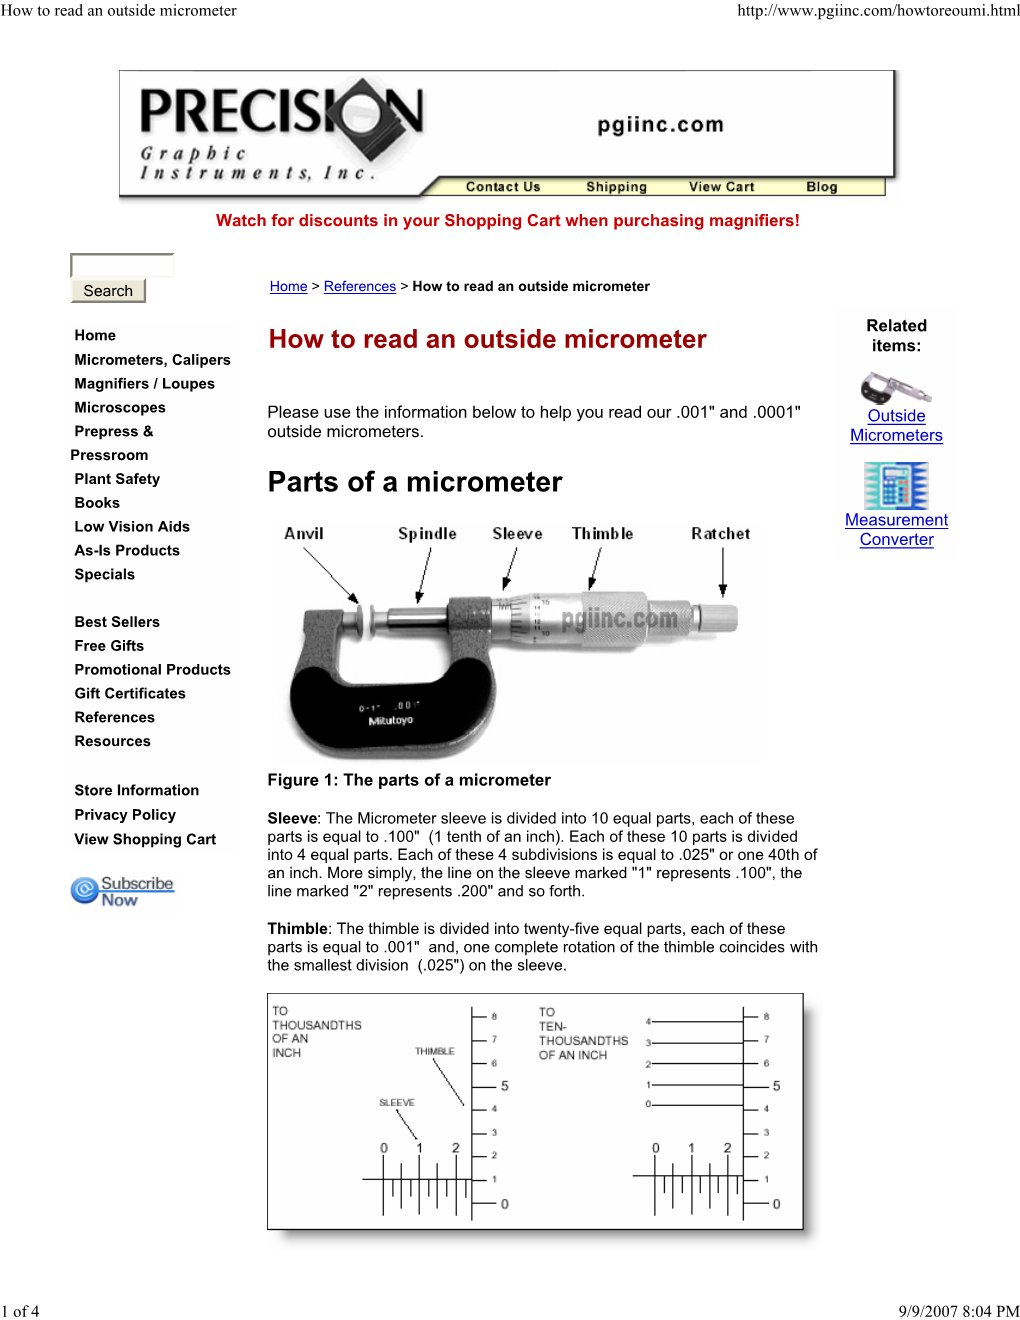 How to Read an Outside Micrometer